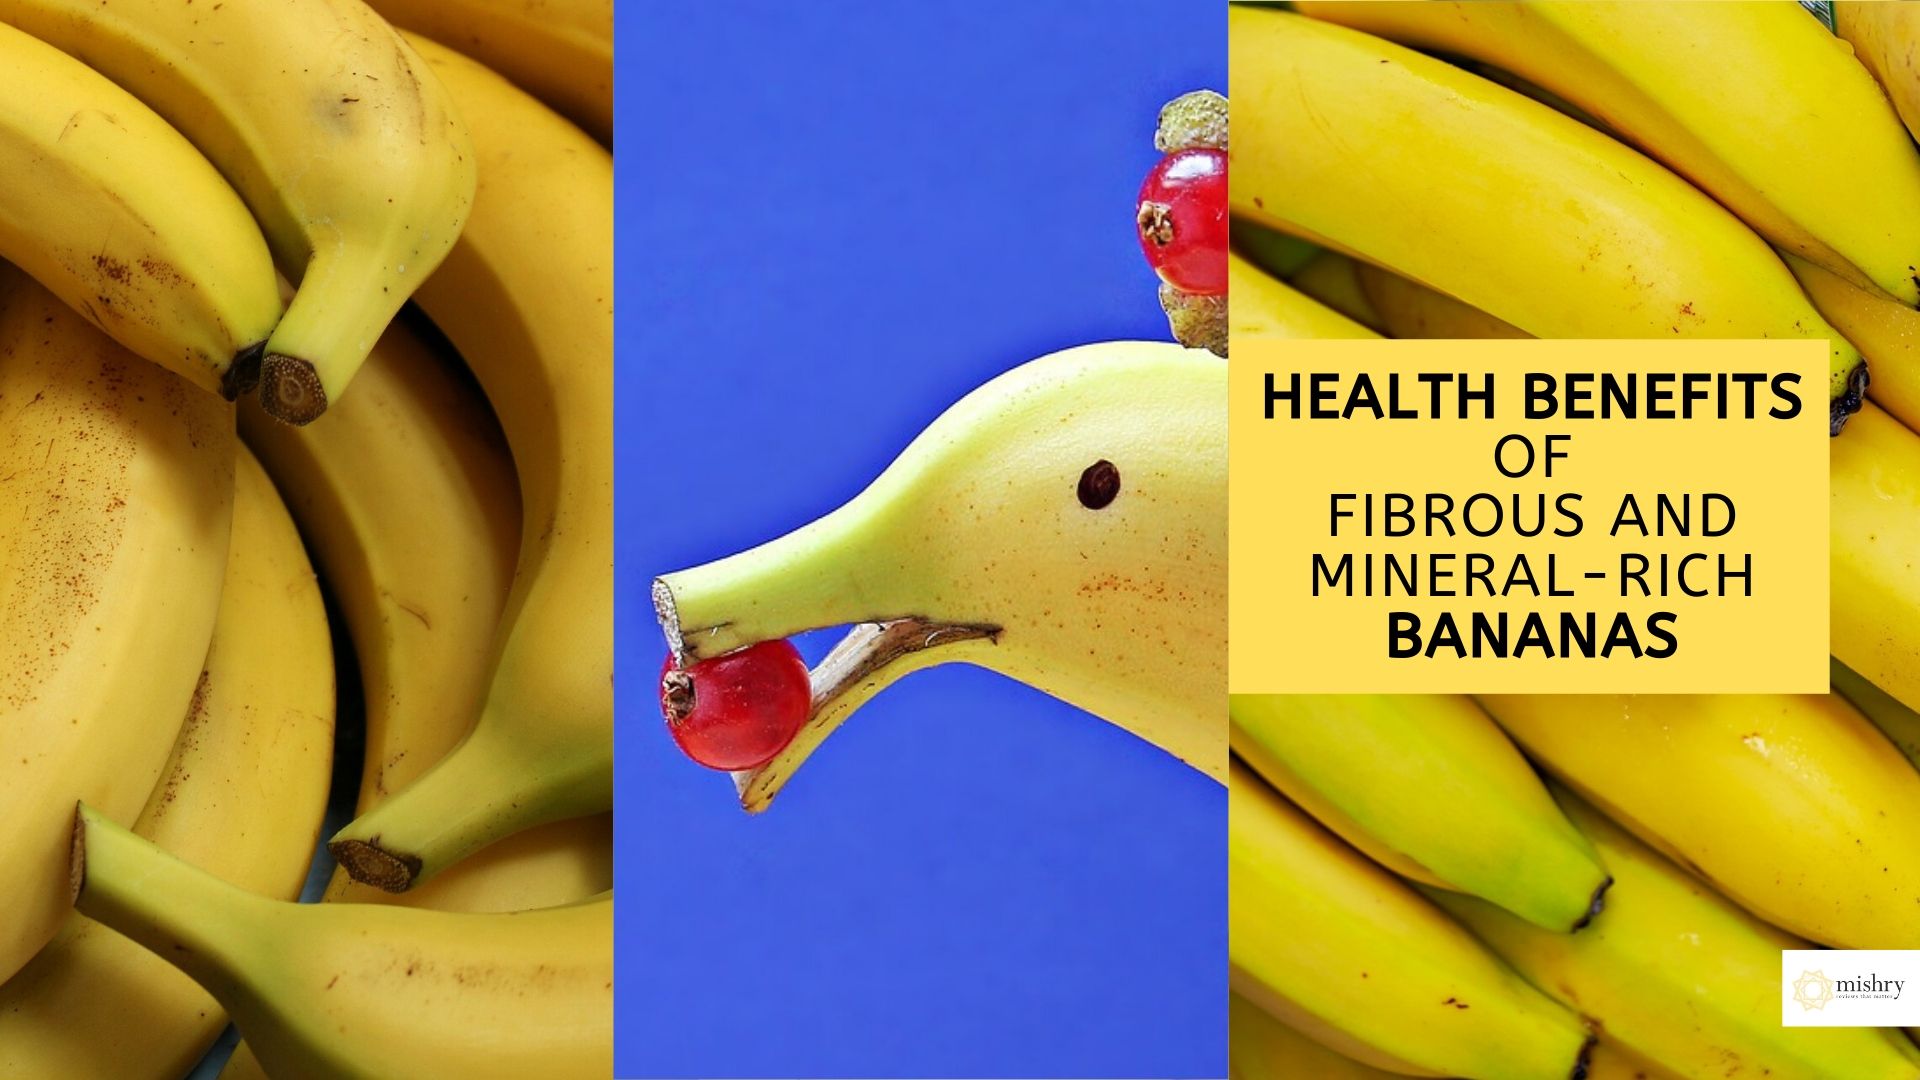 health benefits of fibrous and mineral-rich bananas